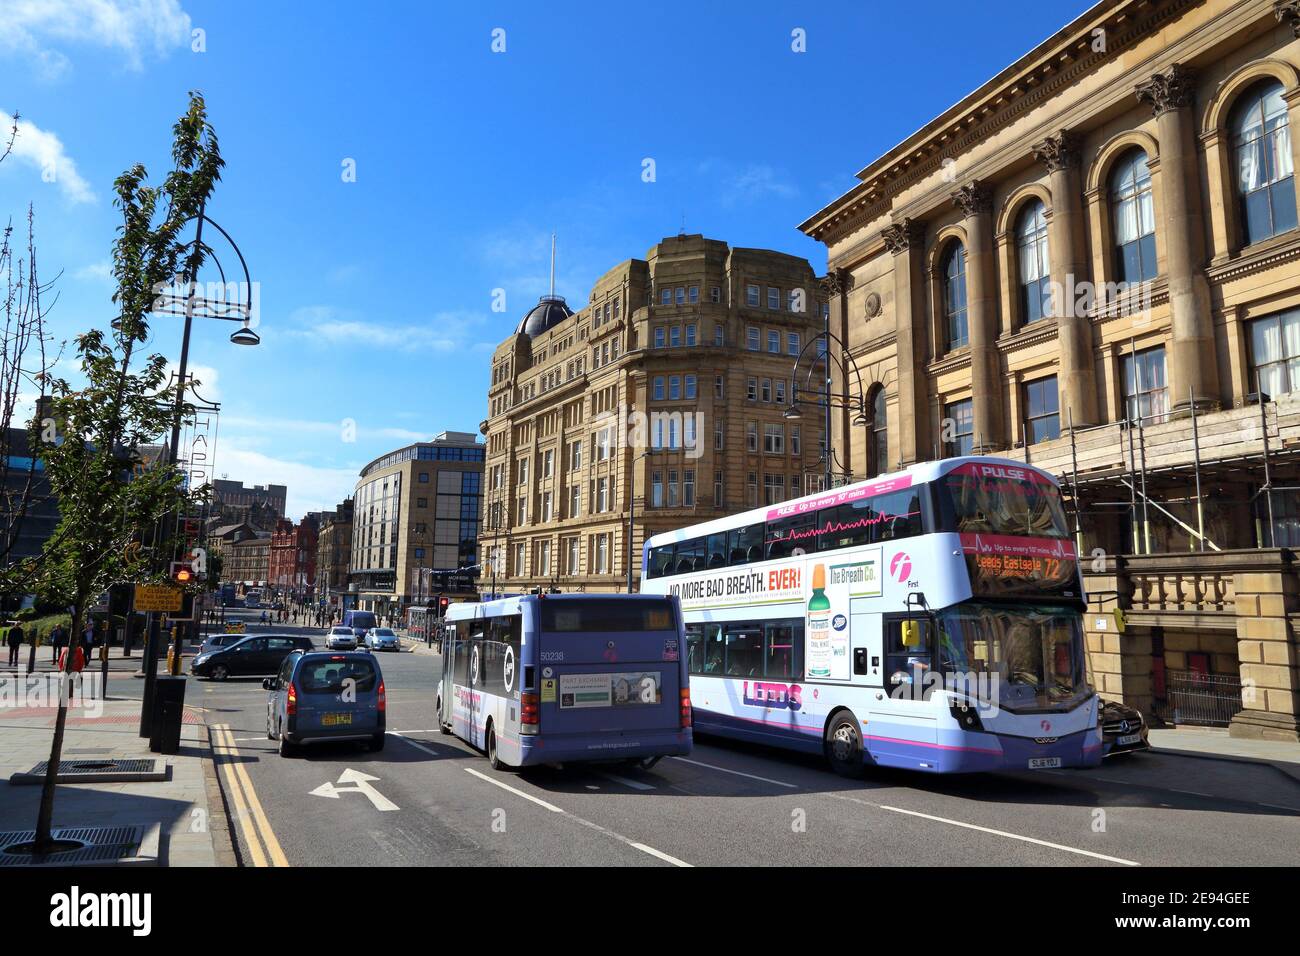 BRADFORD, UK - JULY 11, 2016: People ride First Bradford double decker bus. FirstGroup employs 124,000 people. Stock Photo